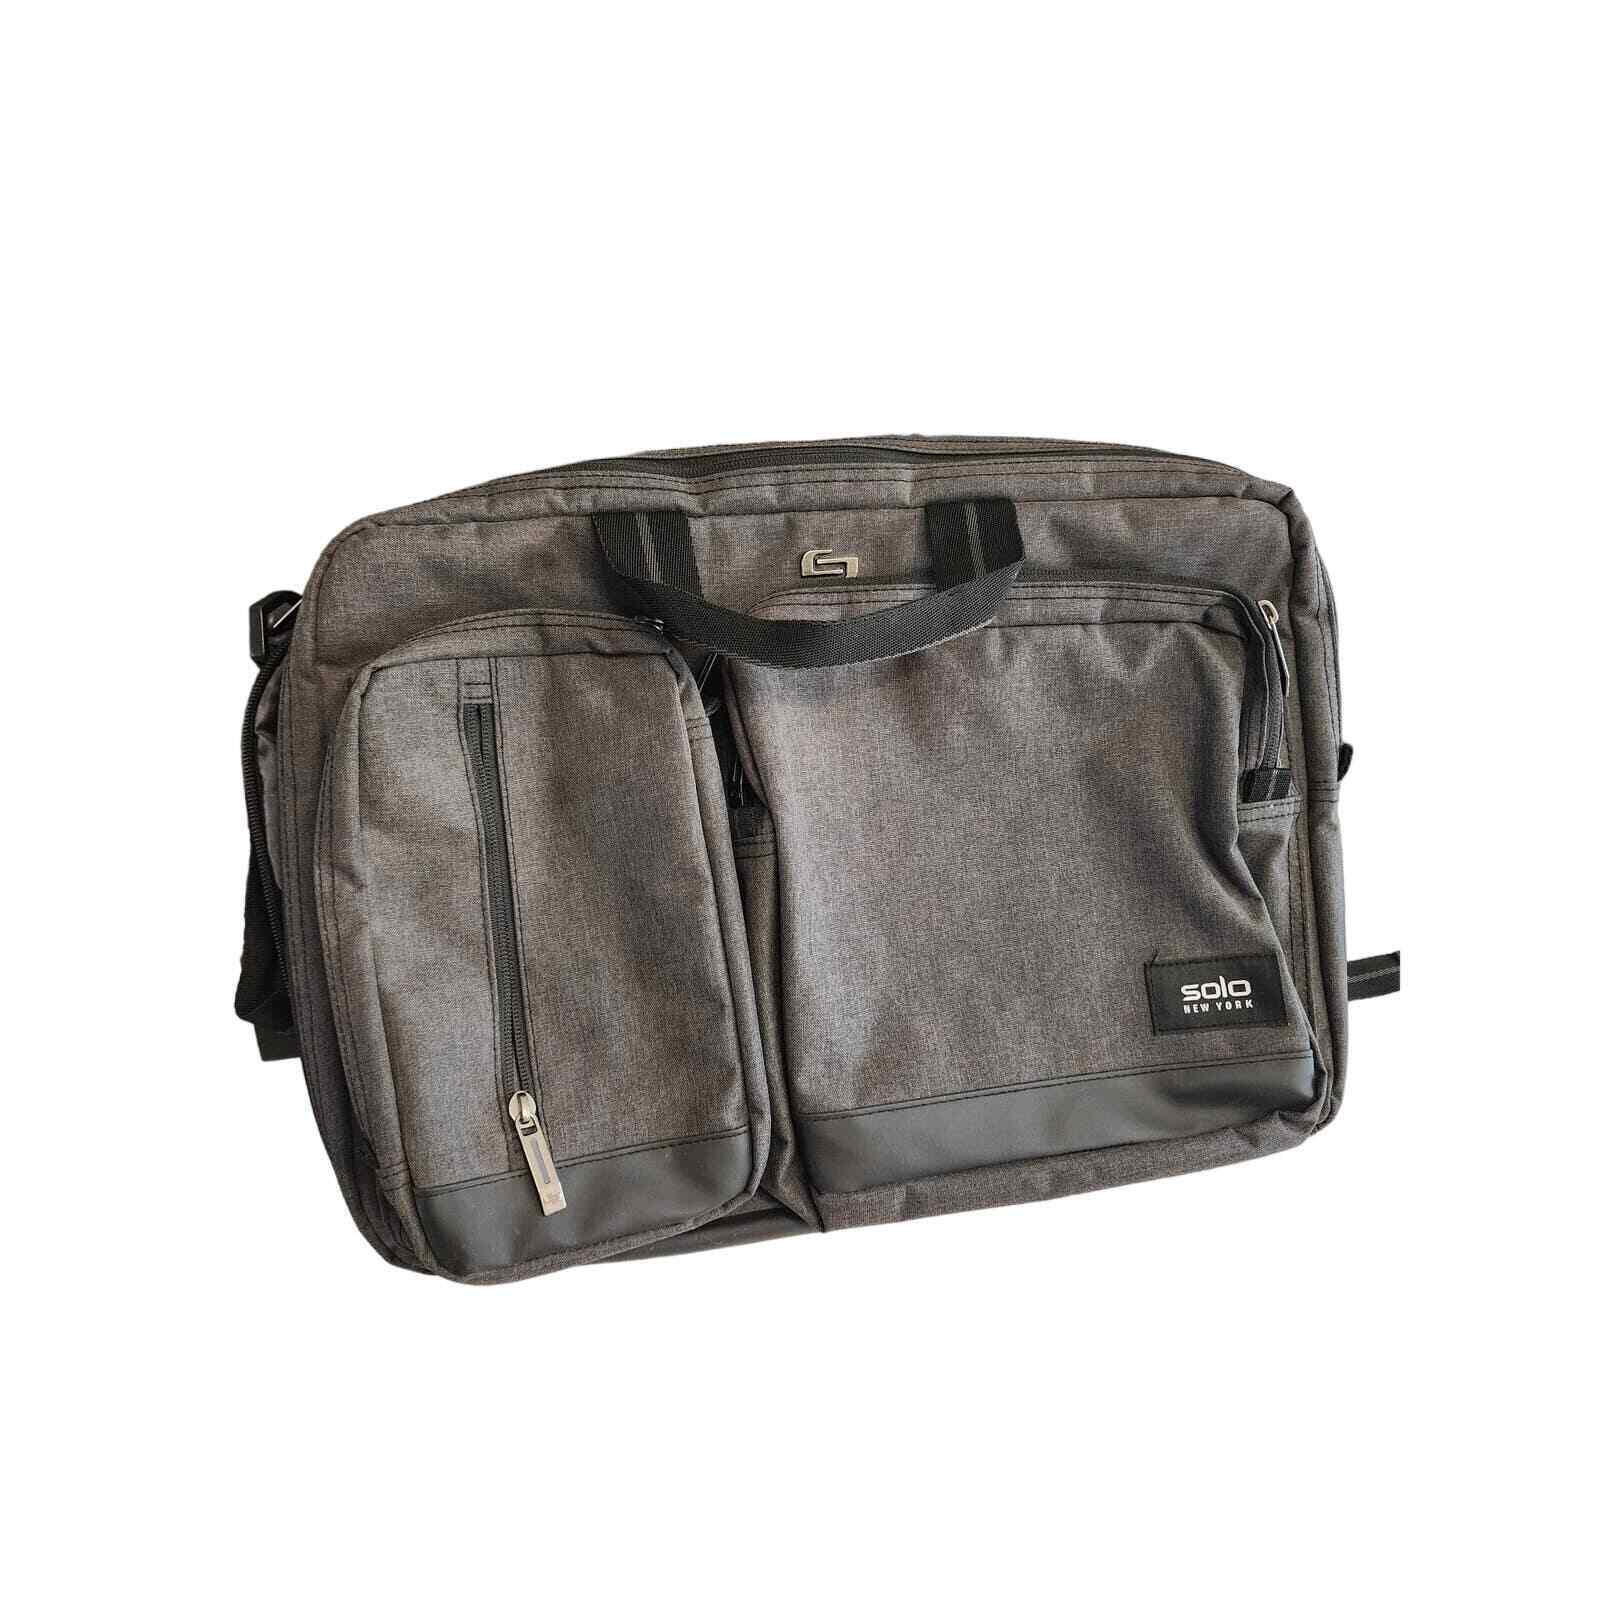 SOLO NEW YORK Laptop Backpack Convertible Briefcase Canvas Gray NWOT